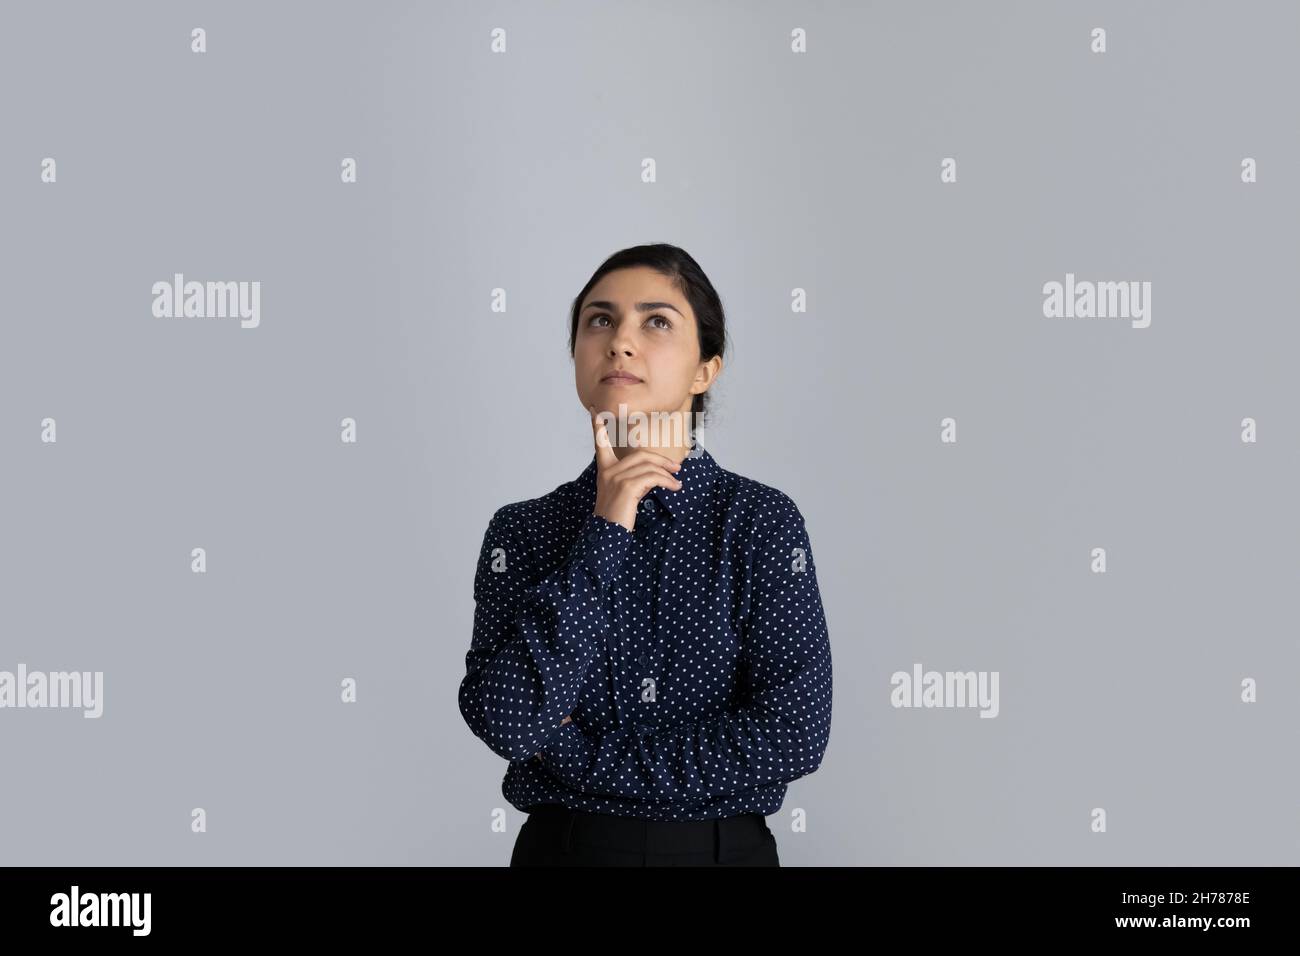 Thoughtful young 30s Indian ethnicity businesswoman considering problem solution. Stock Photo